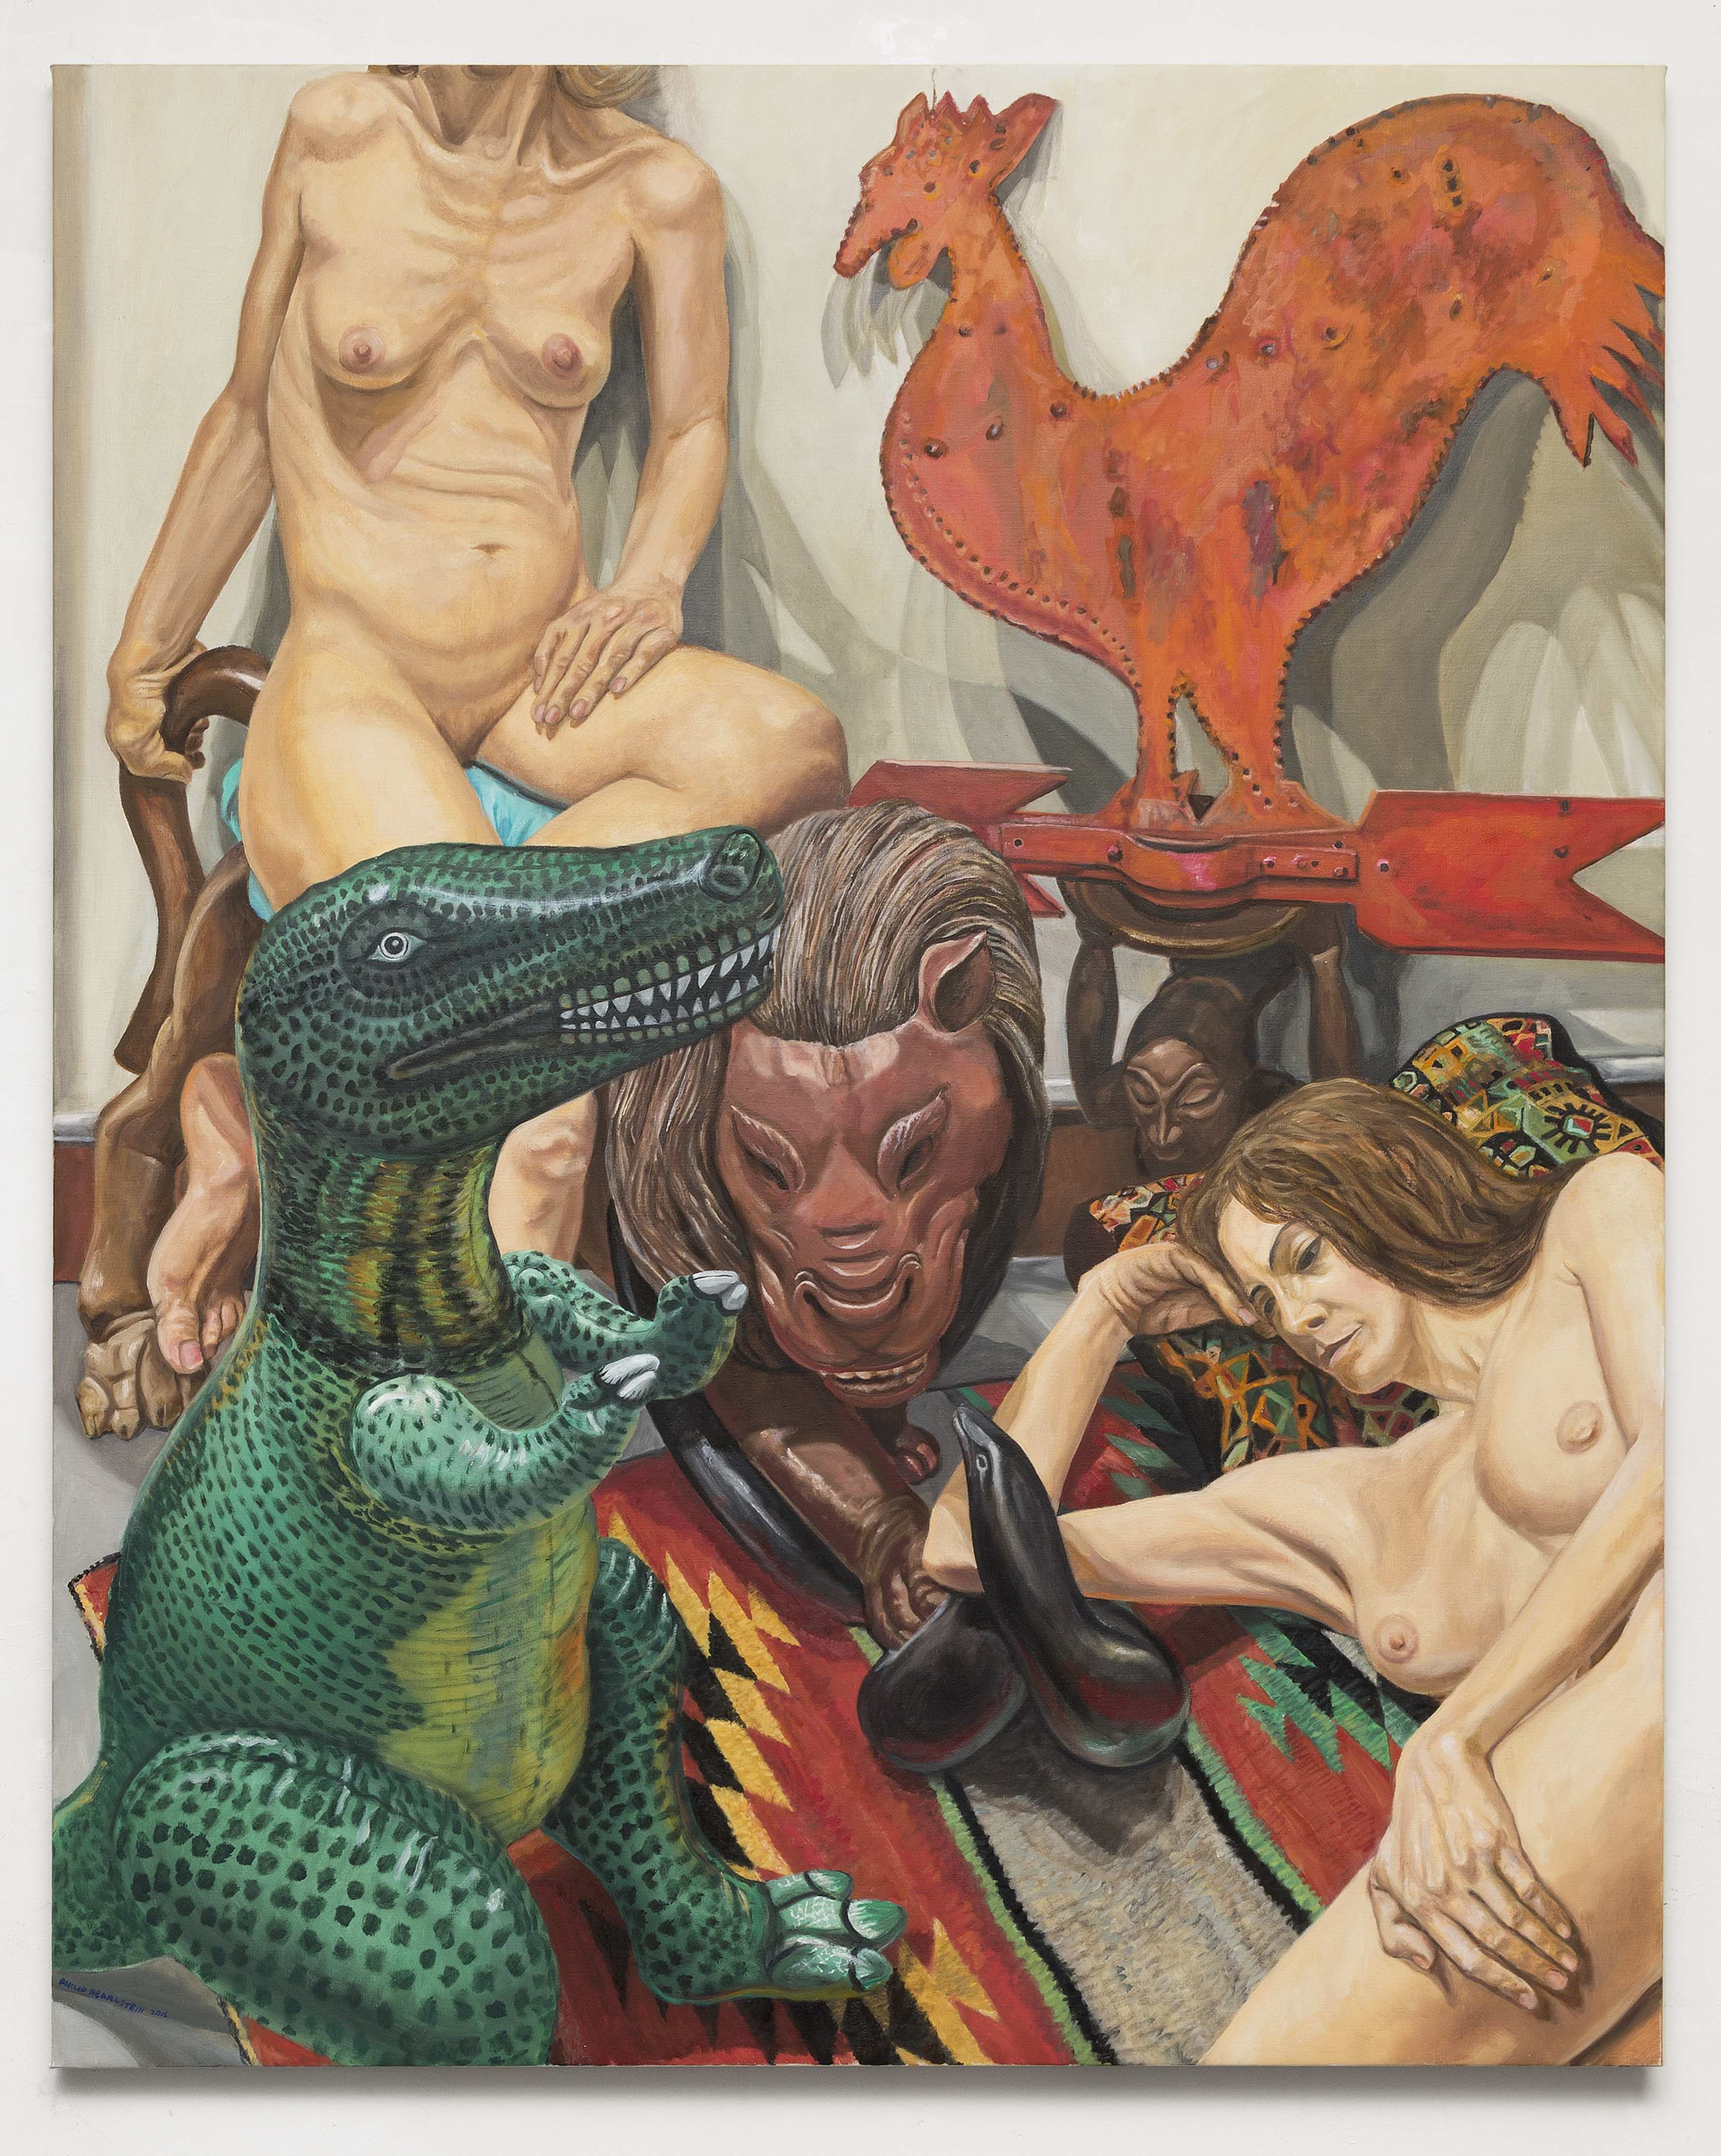 Philip Pearlstein, Two Models, Rooster Weathervane, Luna Park Lion and Blow-up Dinosaur, 2016, Oil on canvas 60 x 48 in. (152.4 x 121.92 cm)